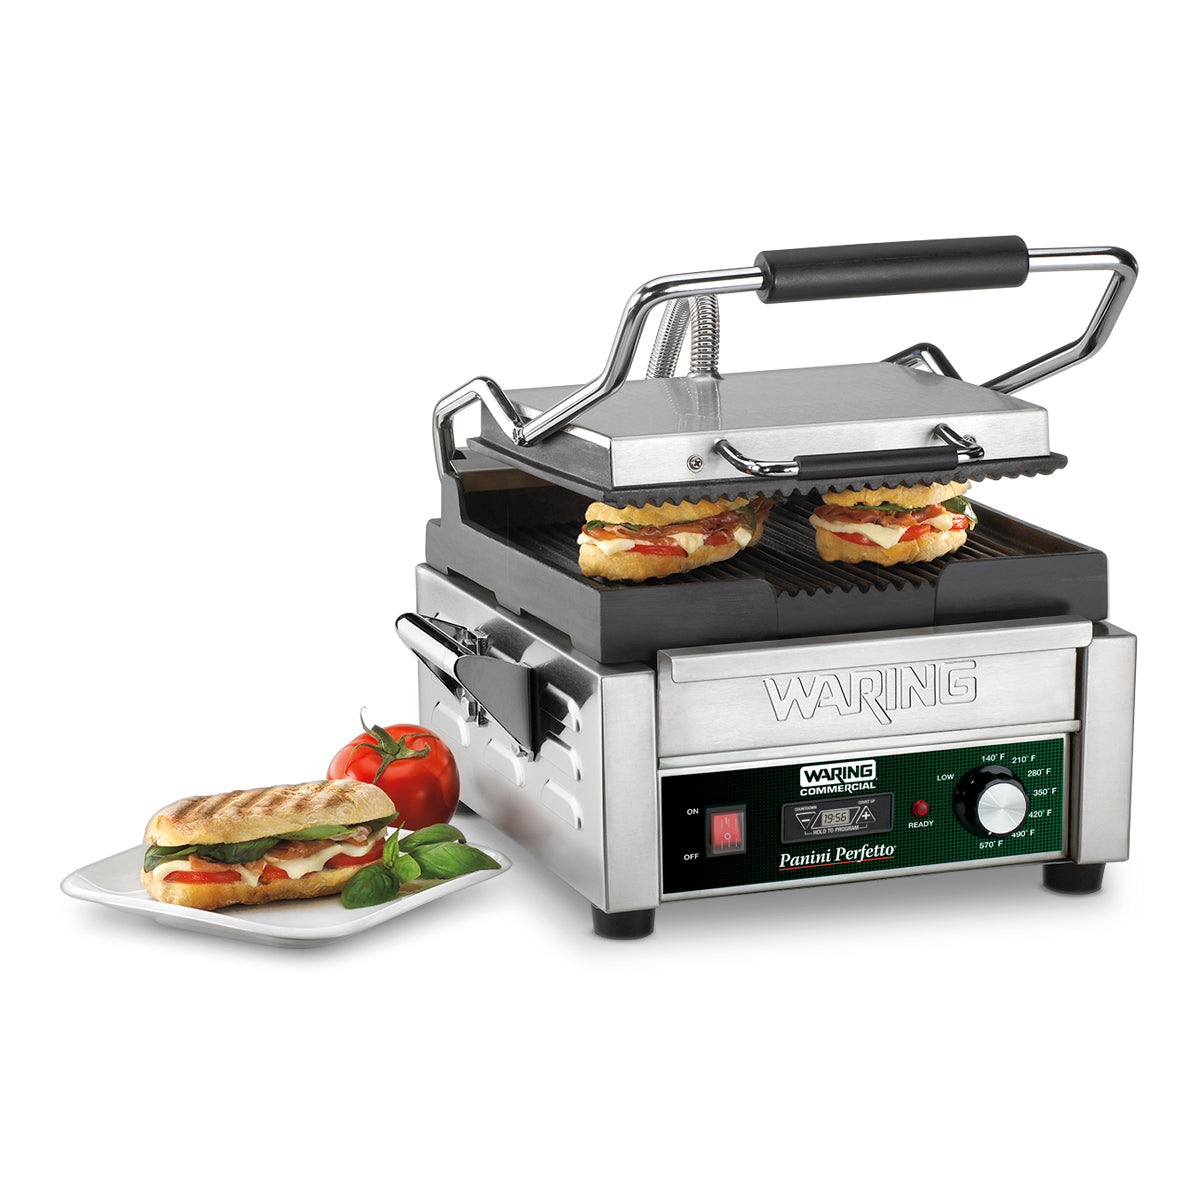 Waring WPG150TB Panini Perfetto® Compact Panini Grill with Timer — 208V (9.75" x 9.25" cooking surface)